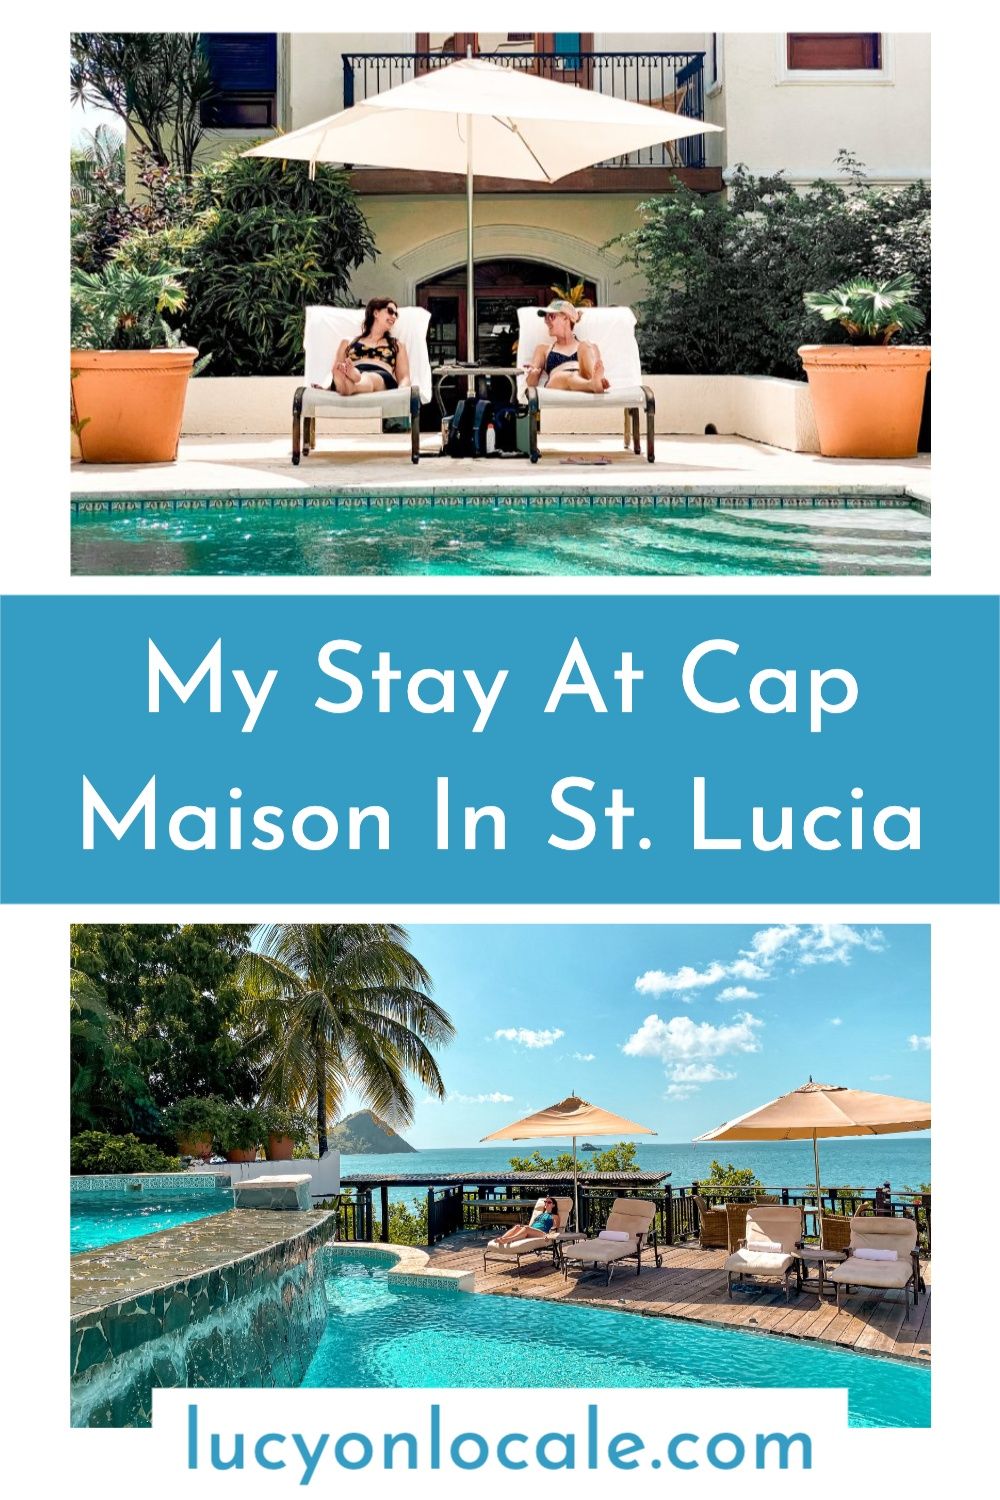 My Stay at Cap Maison in St. Lucia